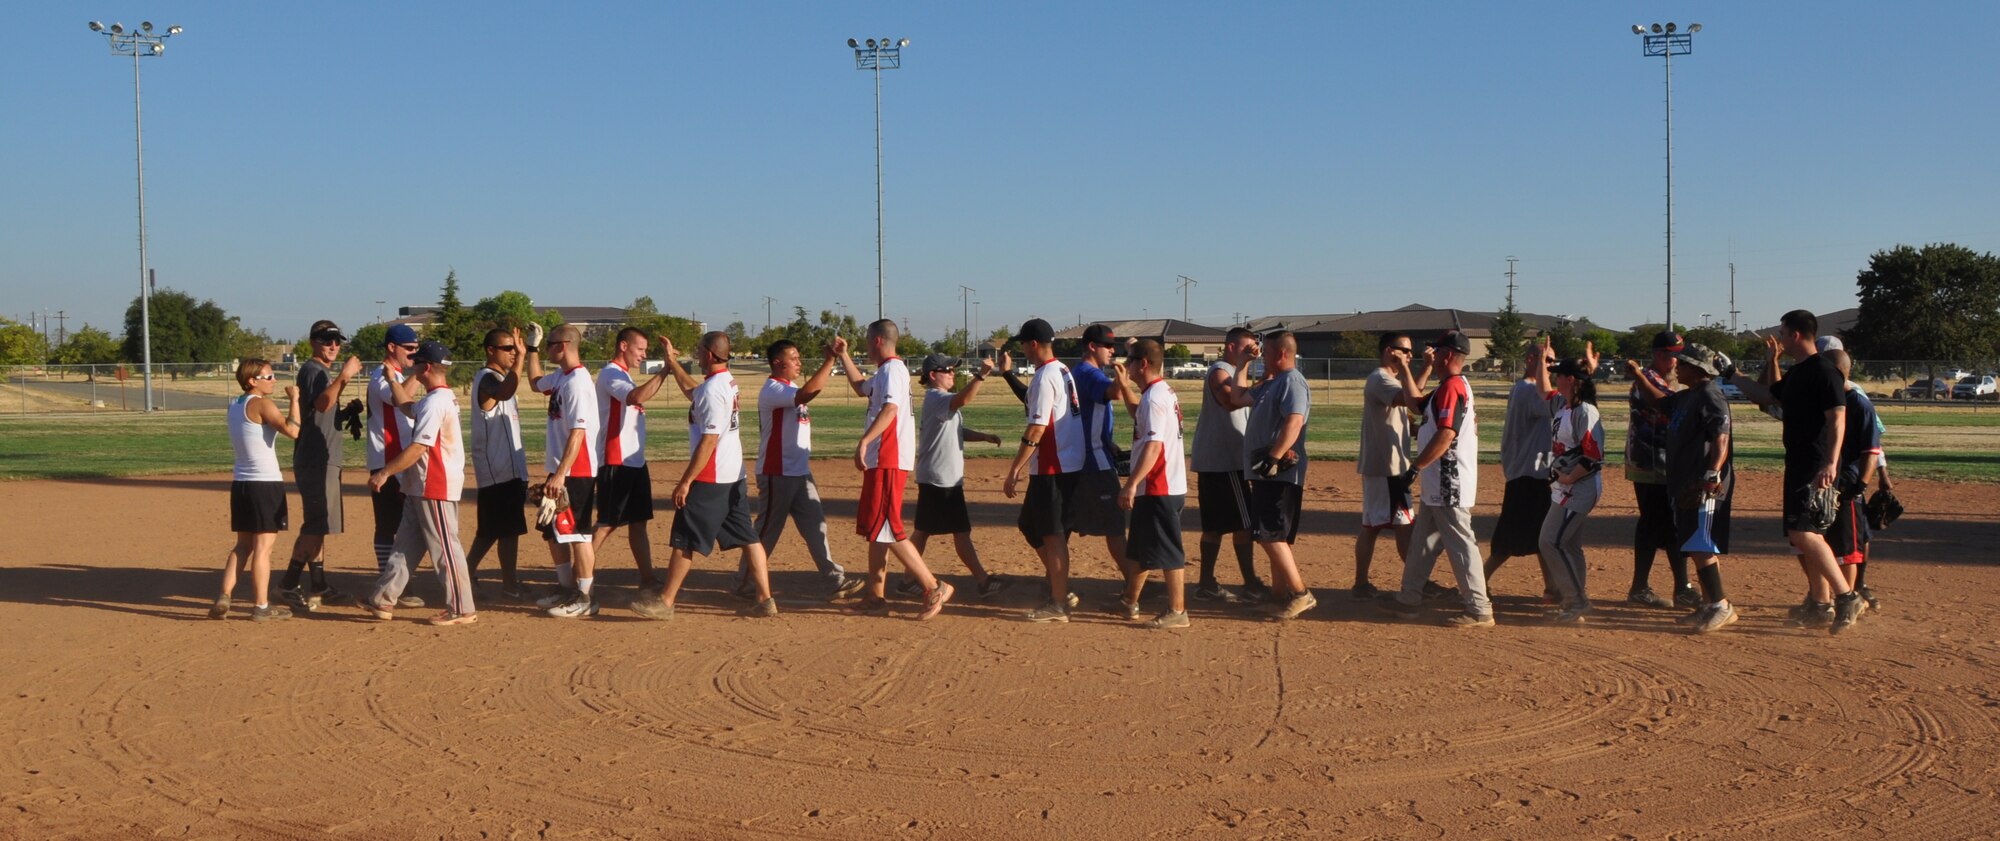 Members of the 9th Maintenance Squadron and 9th Munitions Squadron congratulate each other at the end of Beale’s Intramural Softball Championships at Beale Air Force Base, Calif., Aug. 16, 2012. The 9th MXS defeated the 9th MUNS with a 10-9 victory. (U.S Air Force photo by Staff Sgt. Robert M. Trujillo)